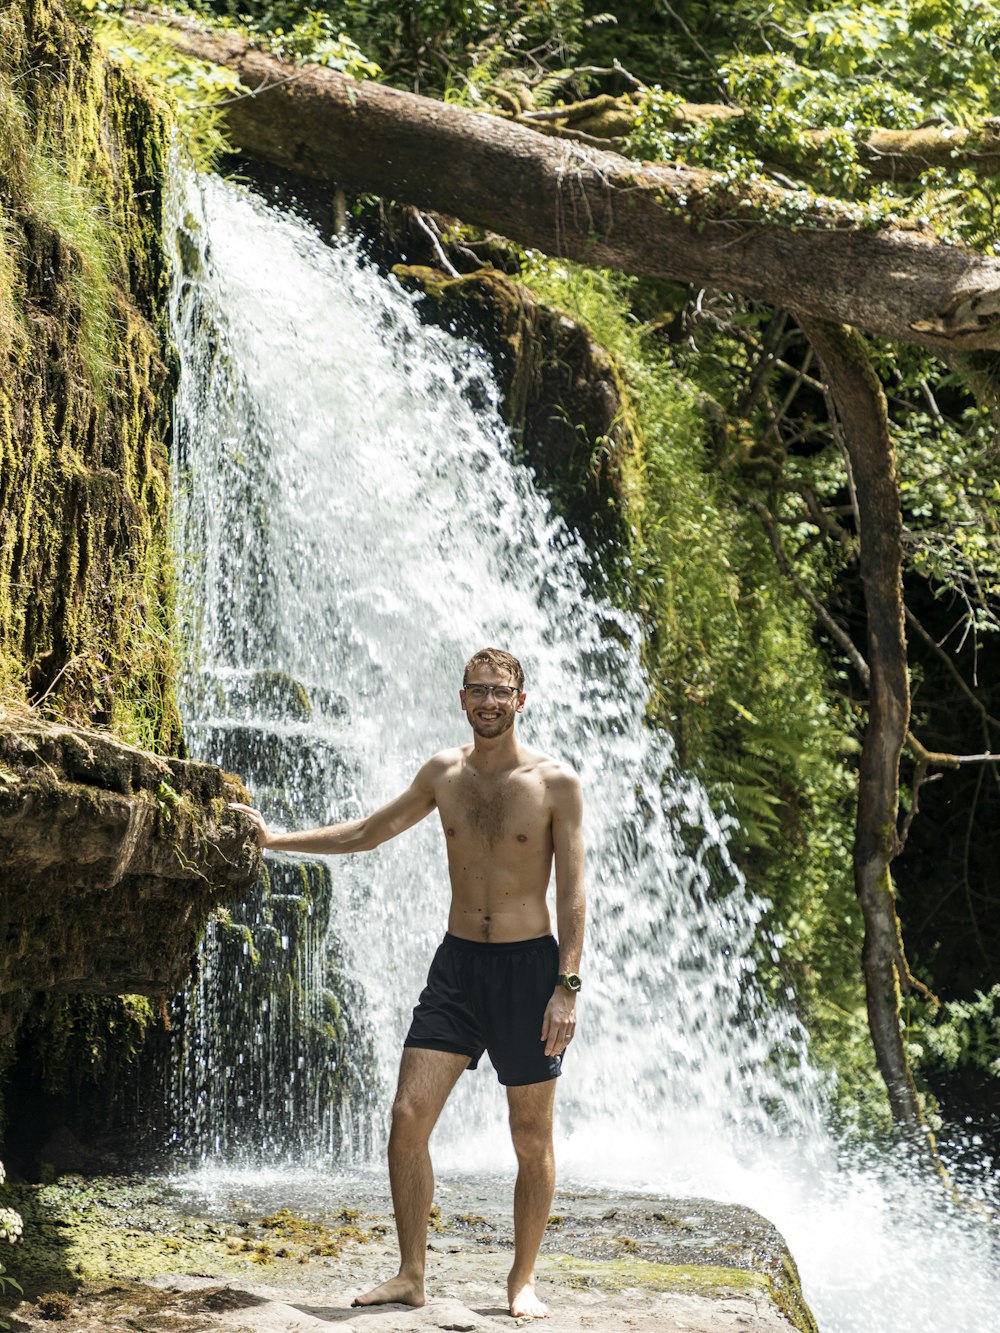 man in blue shorts standing on brown rock near water falls during daytime